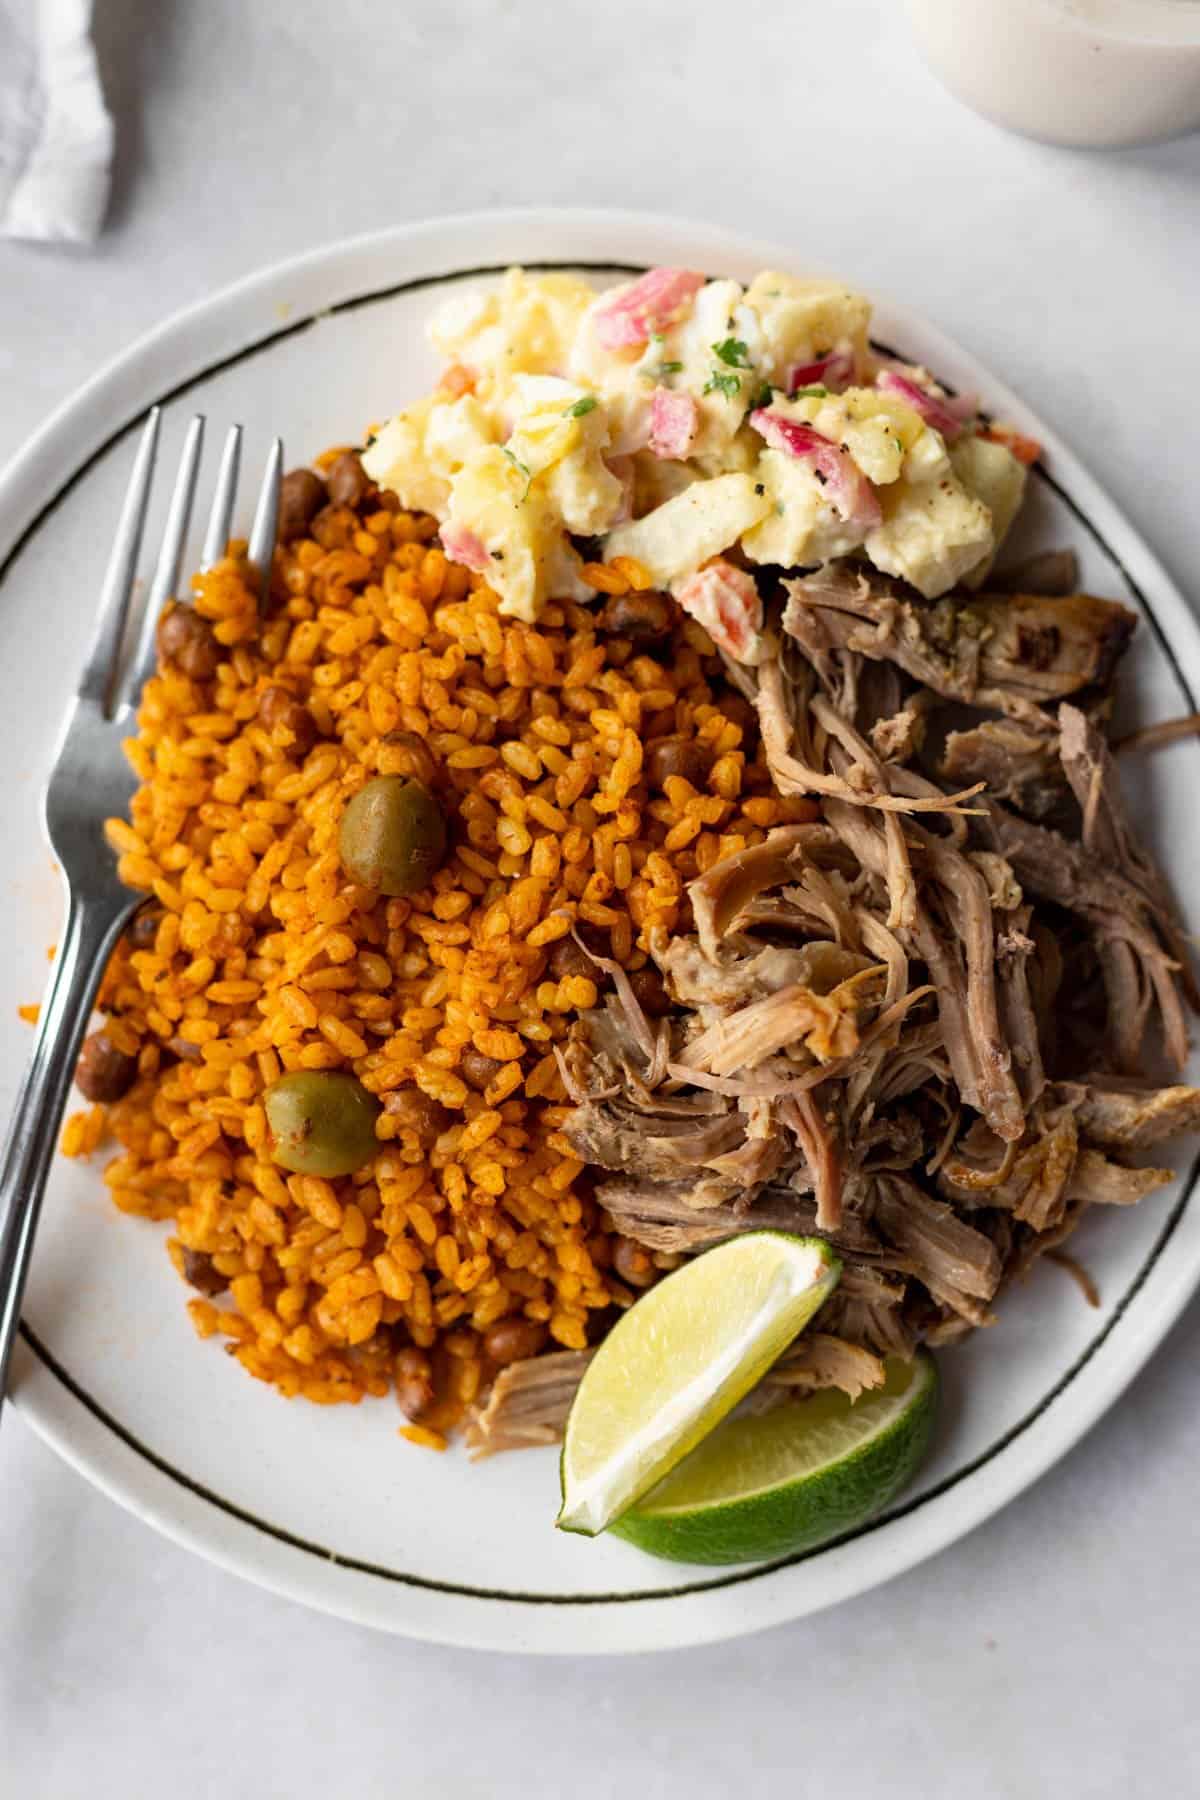 shredded pernil on a white plate with arroz con gandules and ensalada rusa.